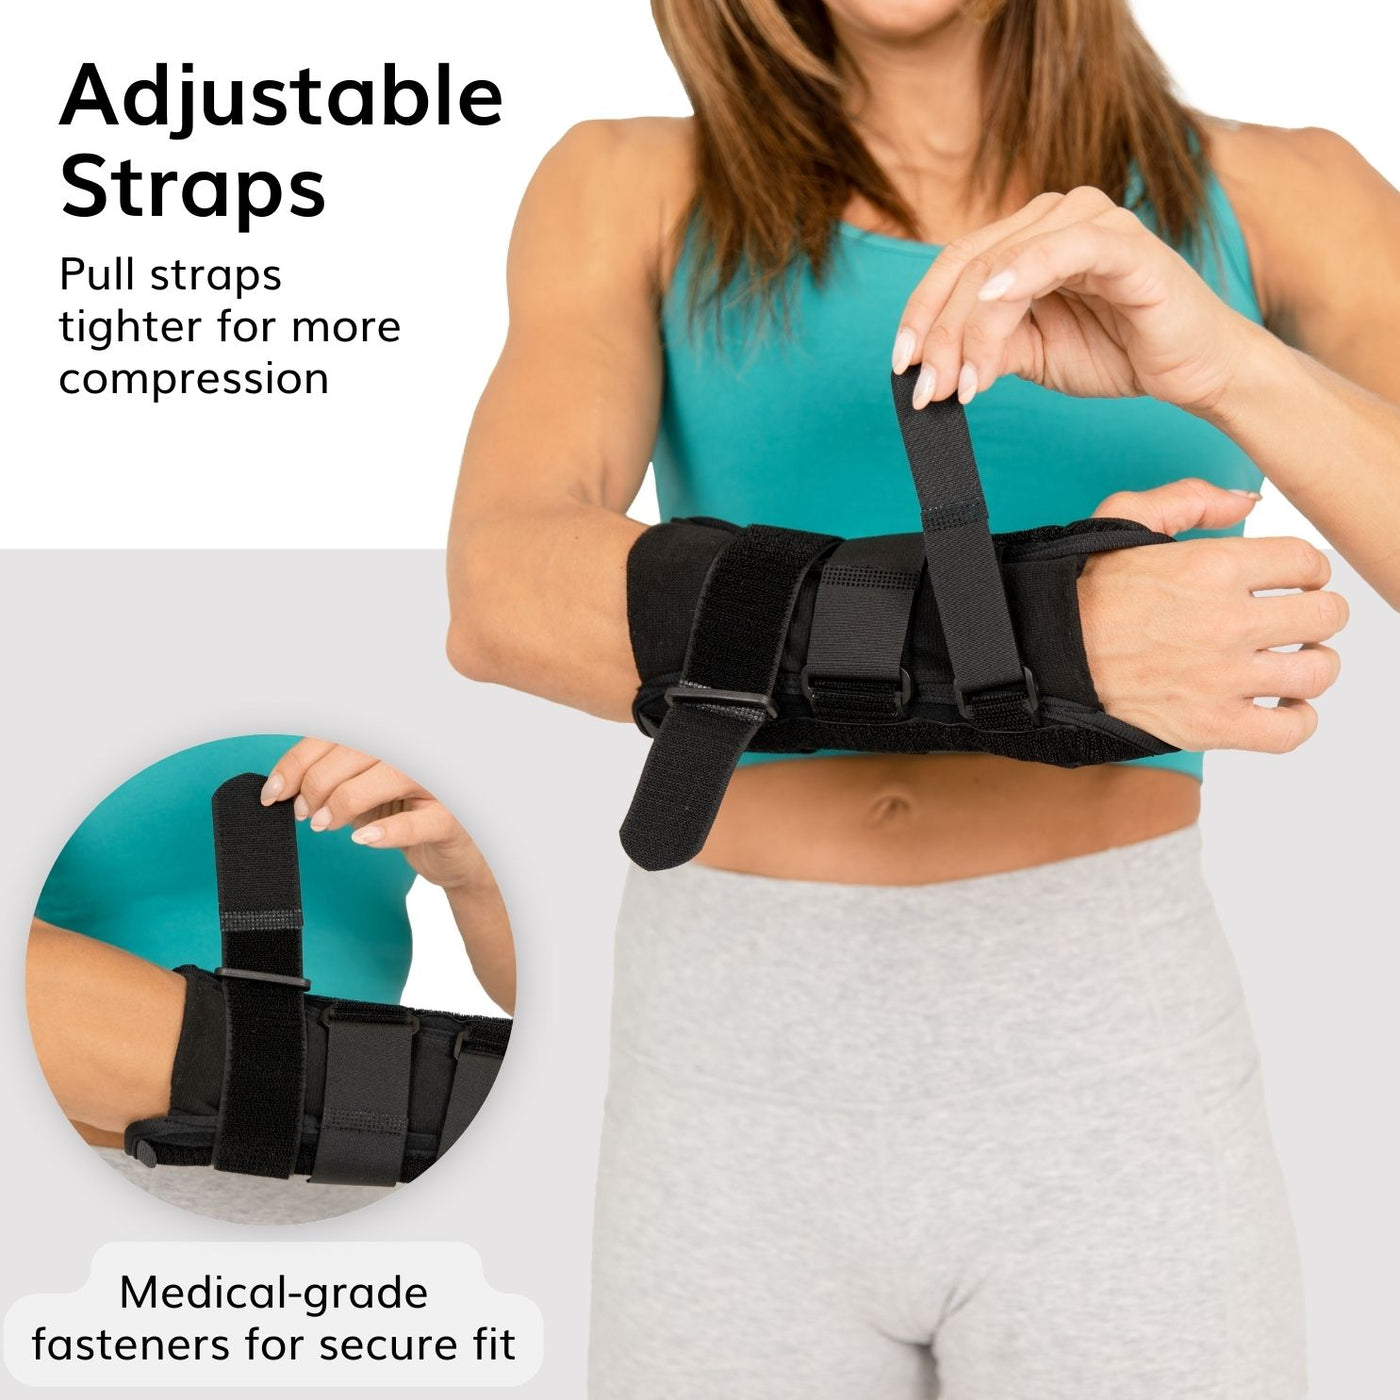 The volar resting wrist splint has adjustable straps, pull tighter for added compression